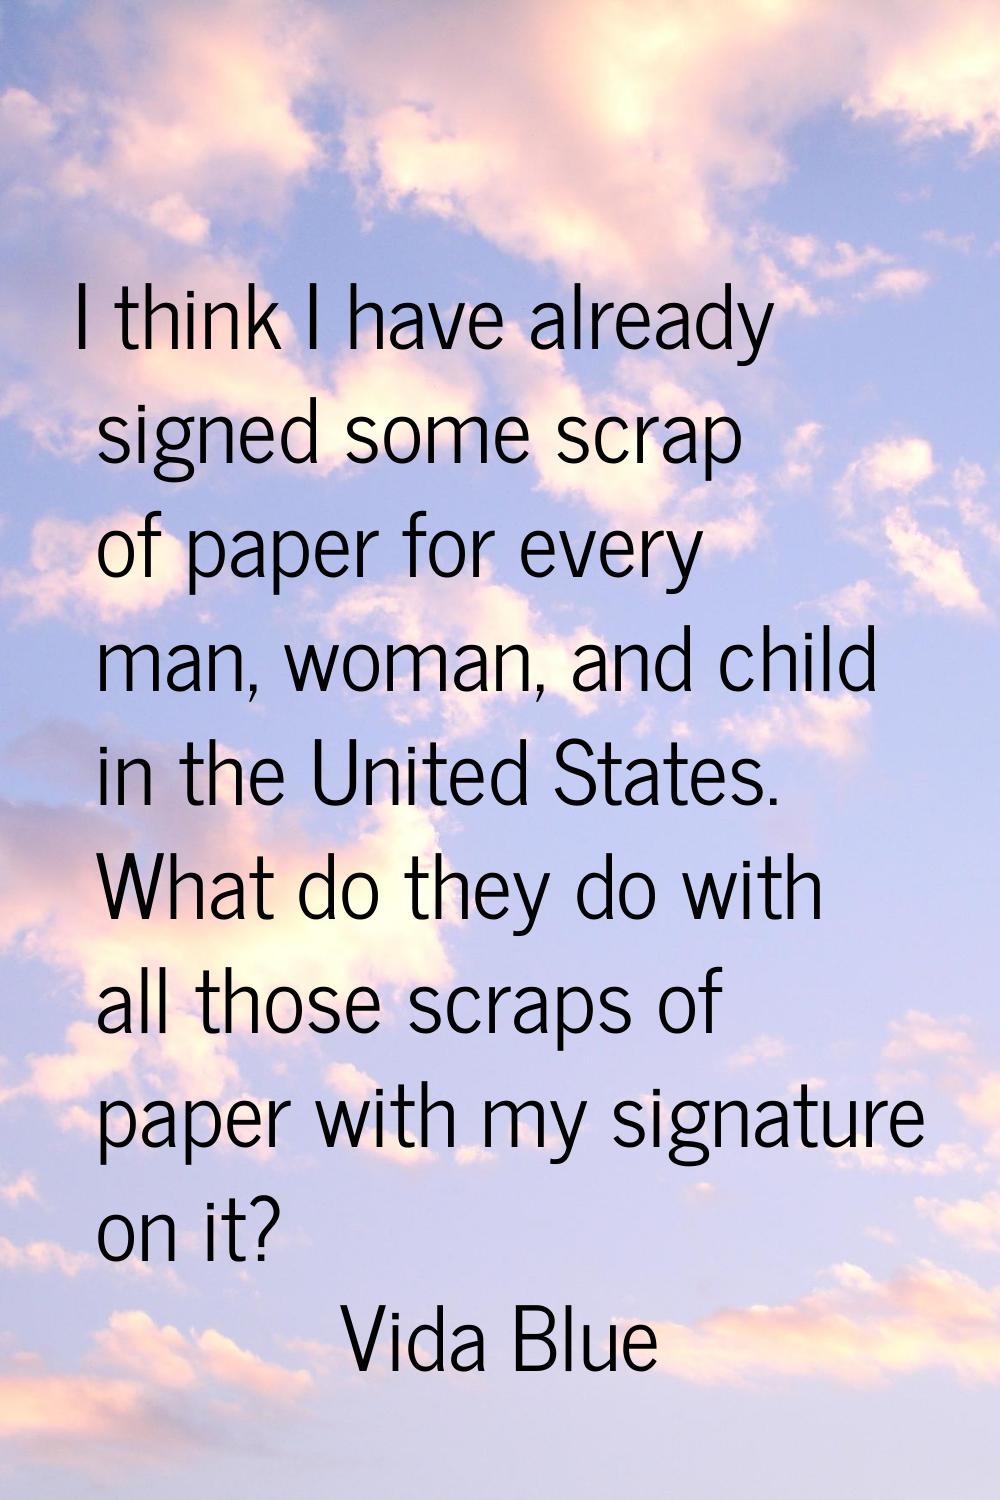 I think I have already signed some scrap of paper for every man, woman, and child in the United Sta